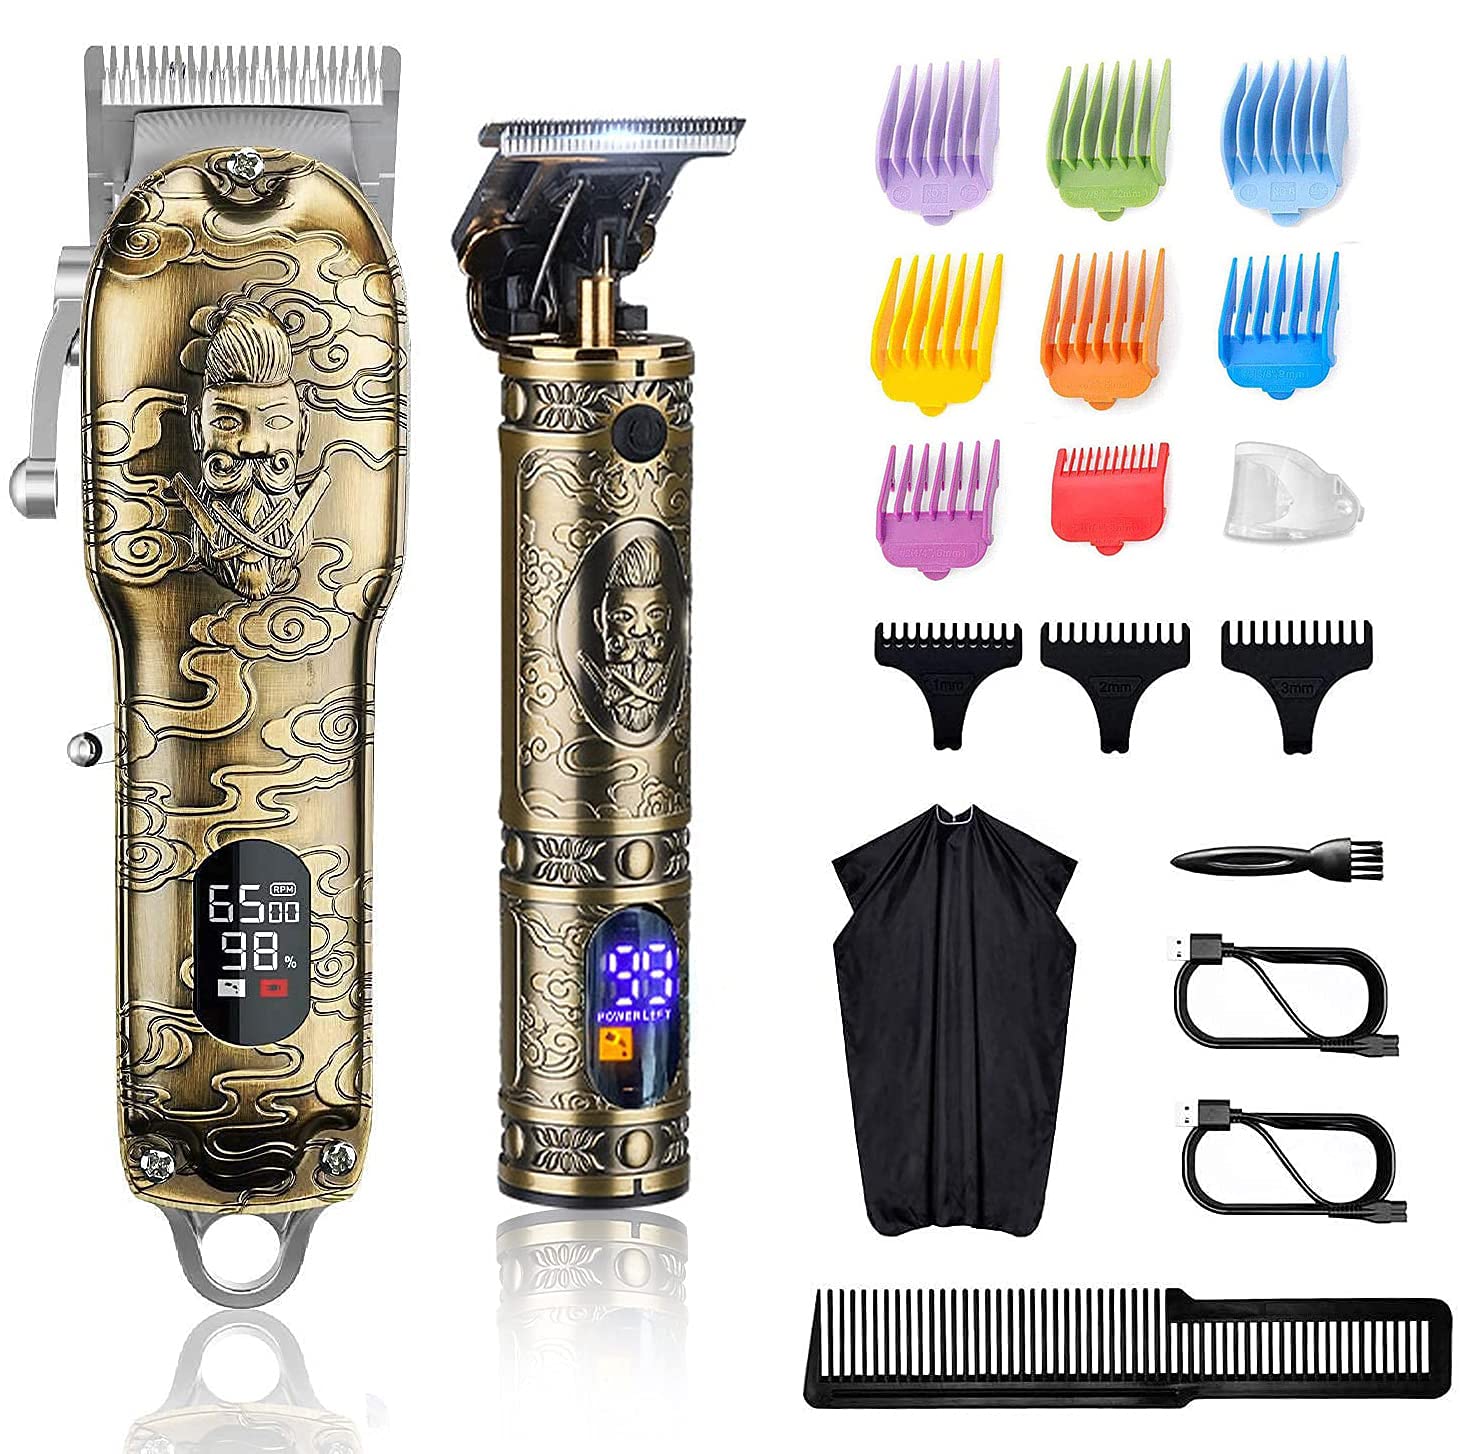 Suttik Hair Clippers Men, Professional Clippers and Trimmers Set, Cordless Barber Clippers for Hair Cutting, Beard Hair Cutting Kit with T-Blade Hair Trimmer, LED Display, Gift for Gold